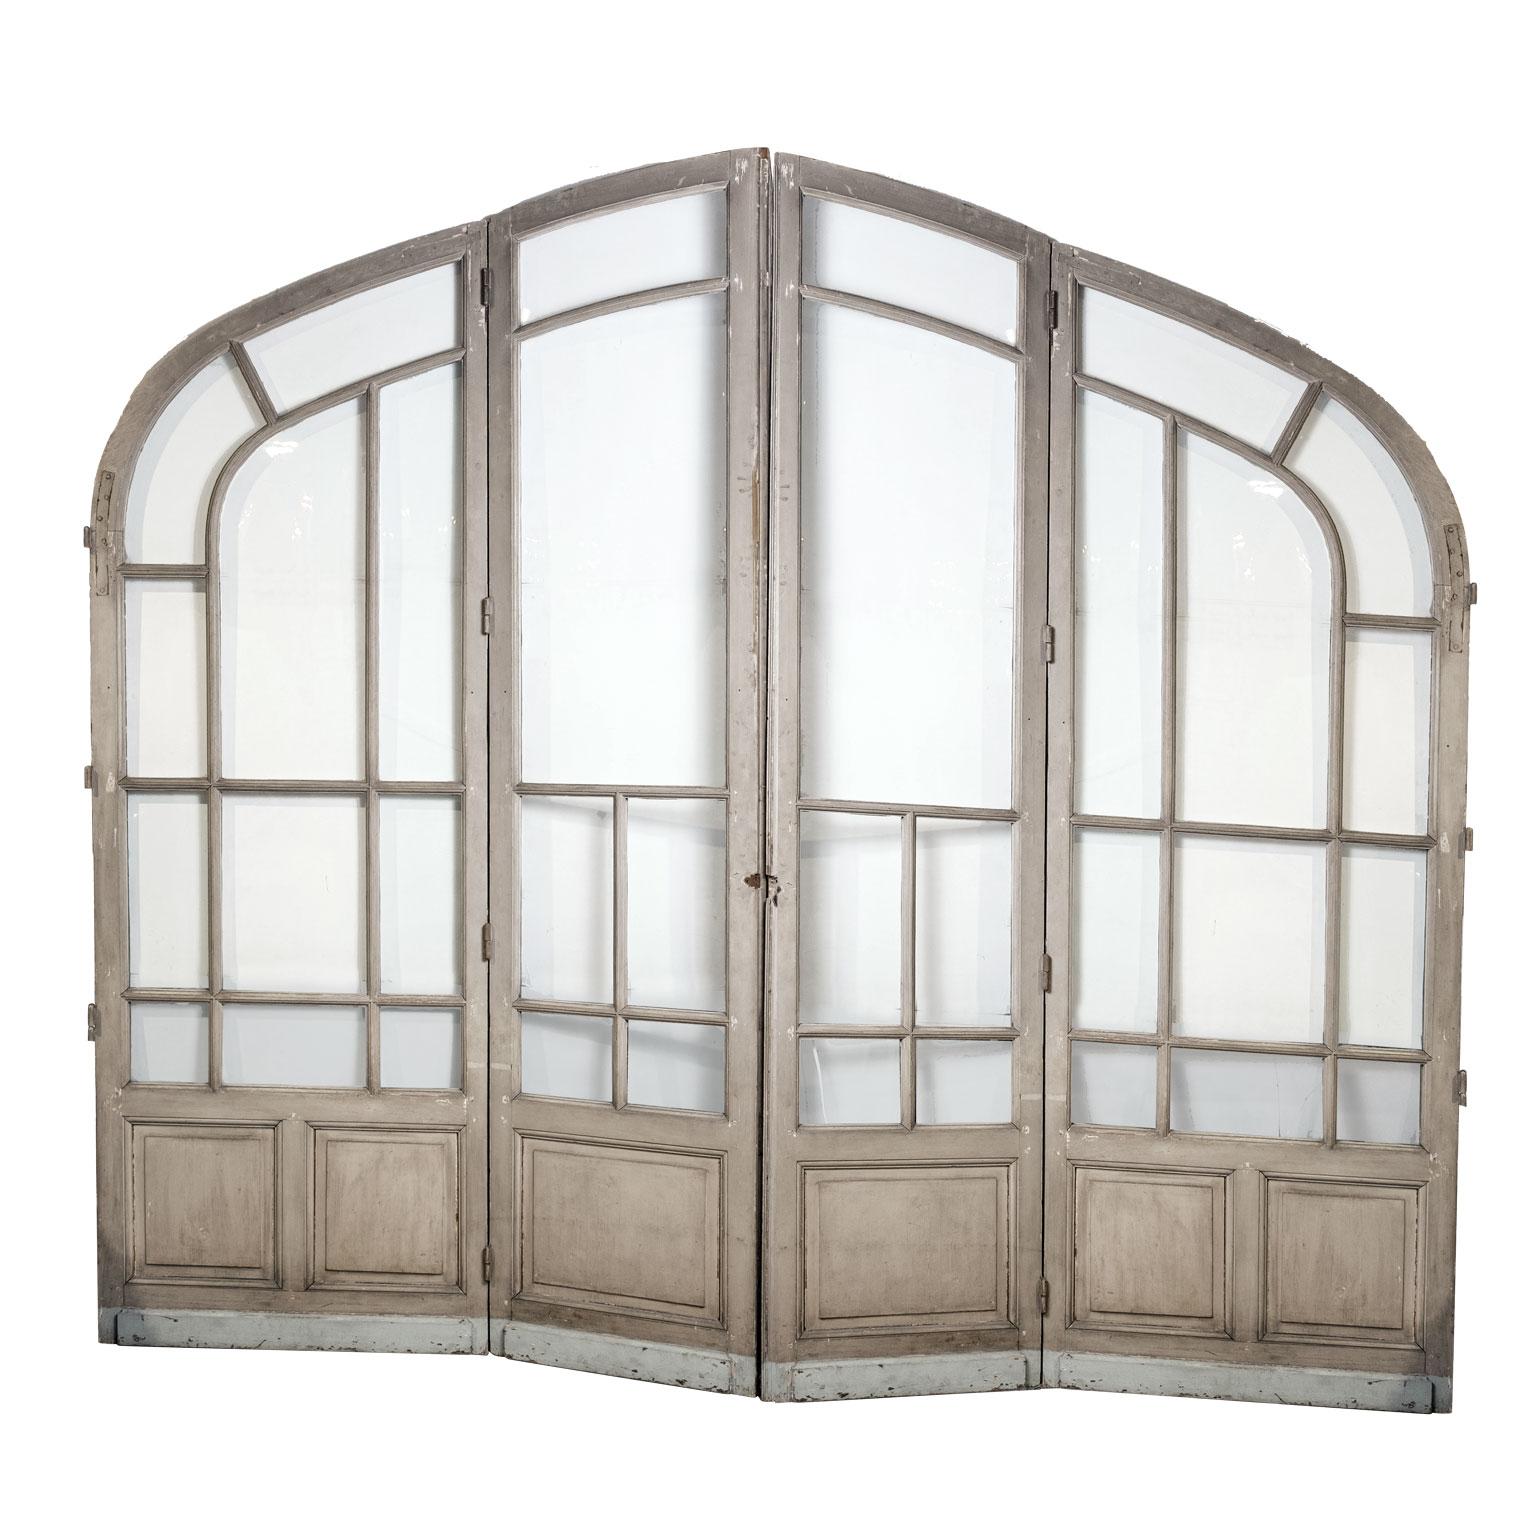 Pair of grand-scale arched glass paneled double doors. Contains (mostly) original glass plates (one missing, the second broken) Constructed, circa 1910 in Paris.

Note: Original/early finish on antique and vintage metal will include some, or all, of